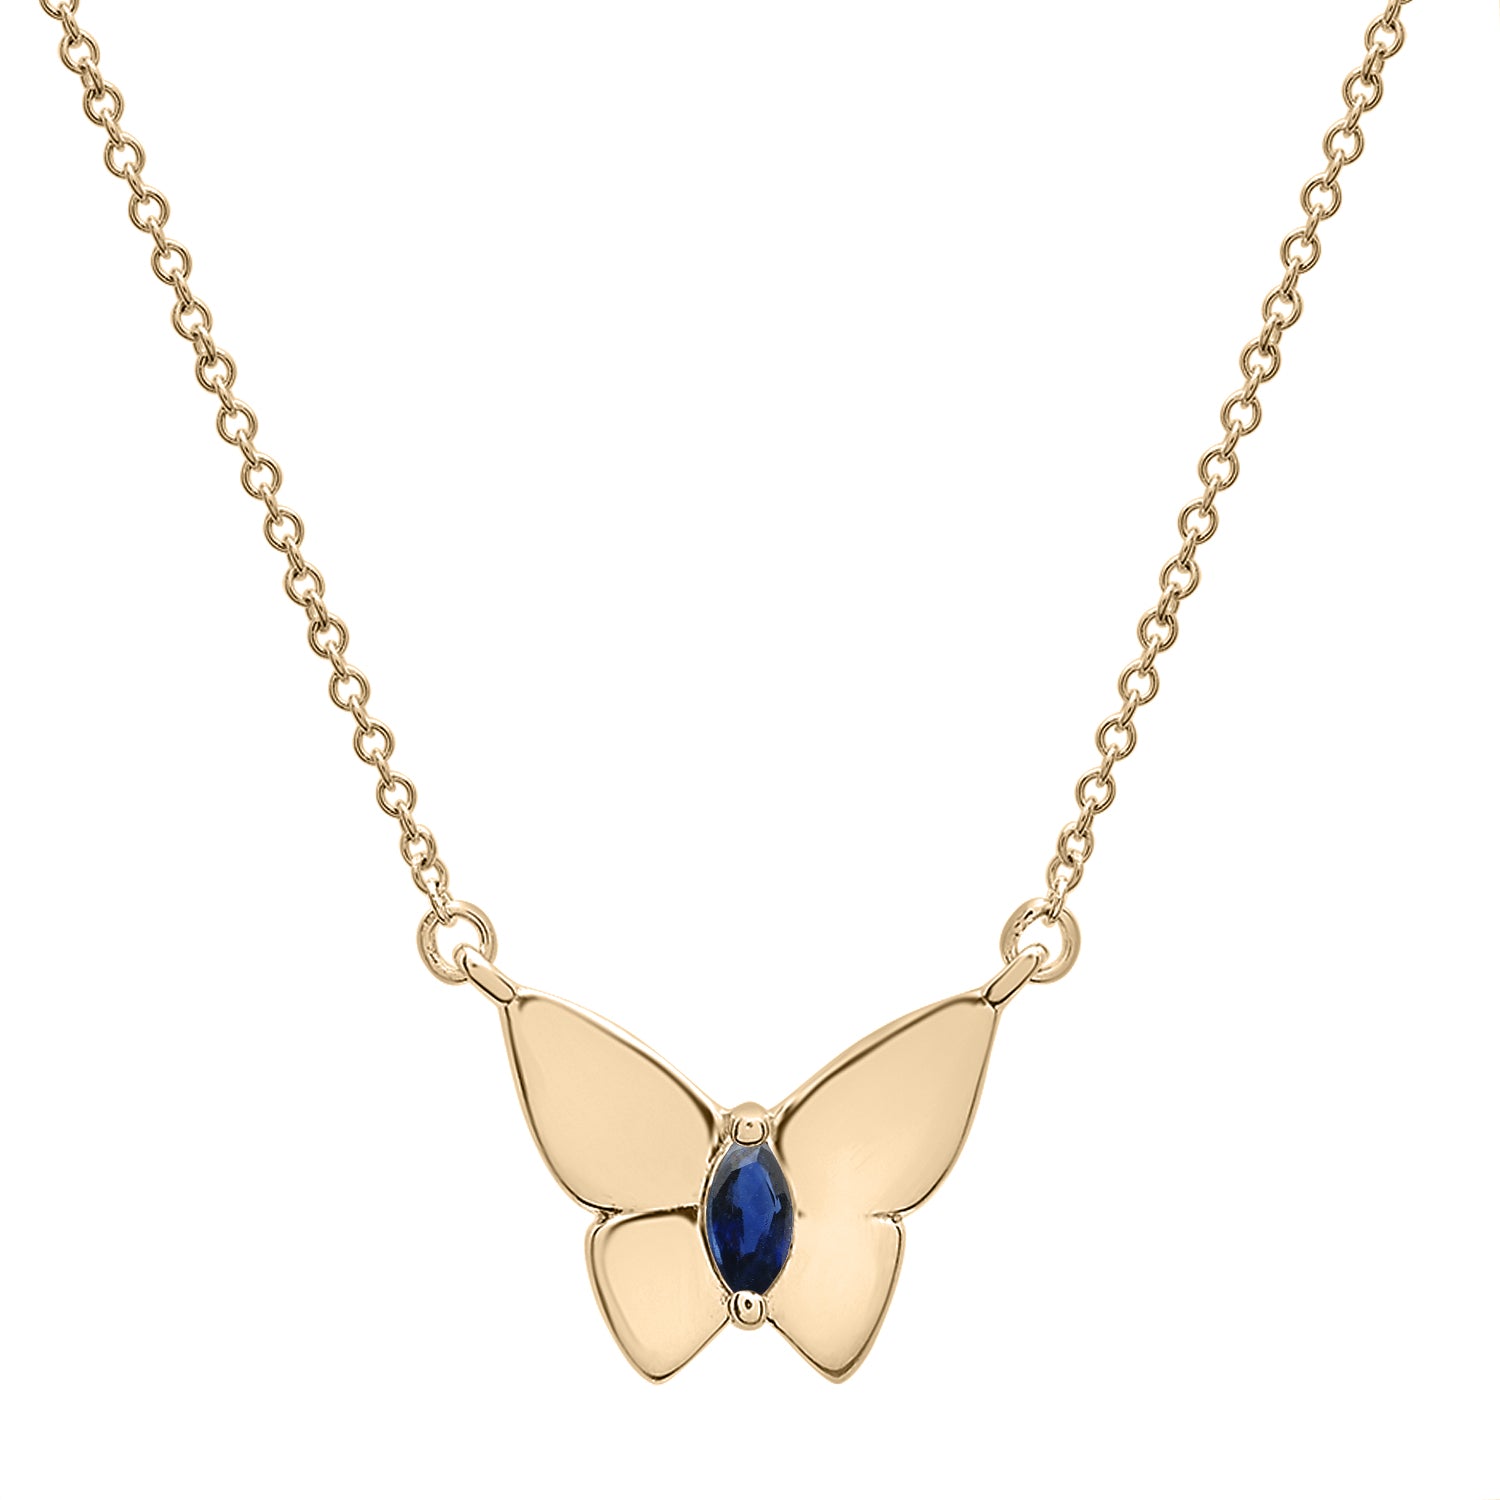 Blue Stone Butterfly Birthstone Necklace in Gold chain